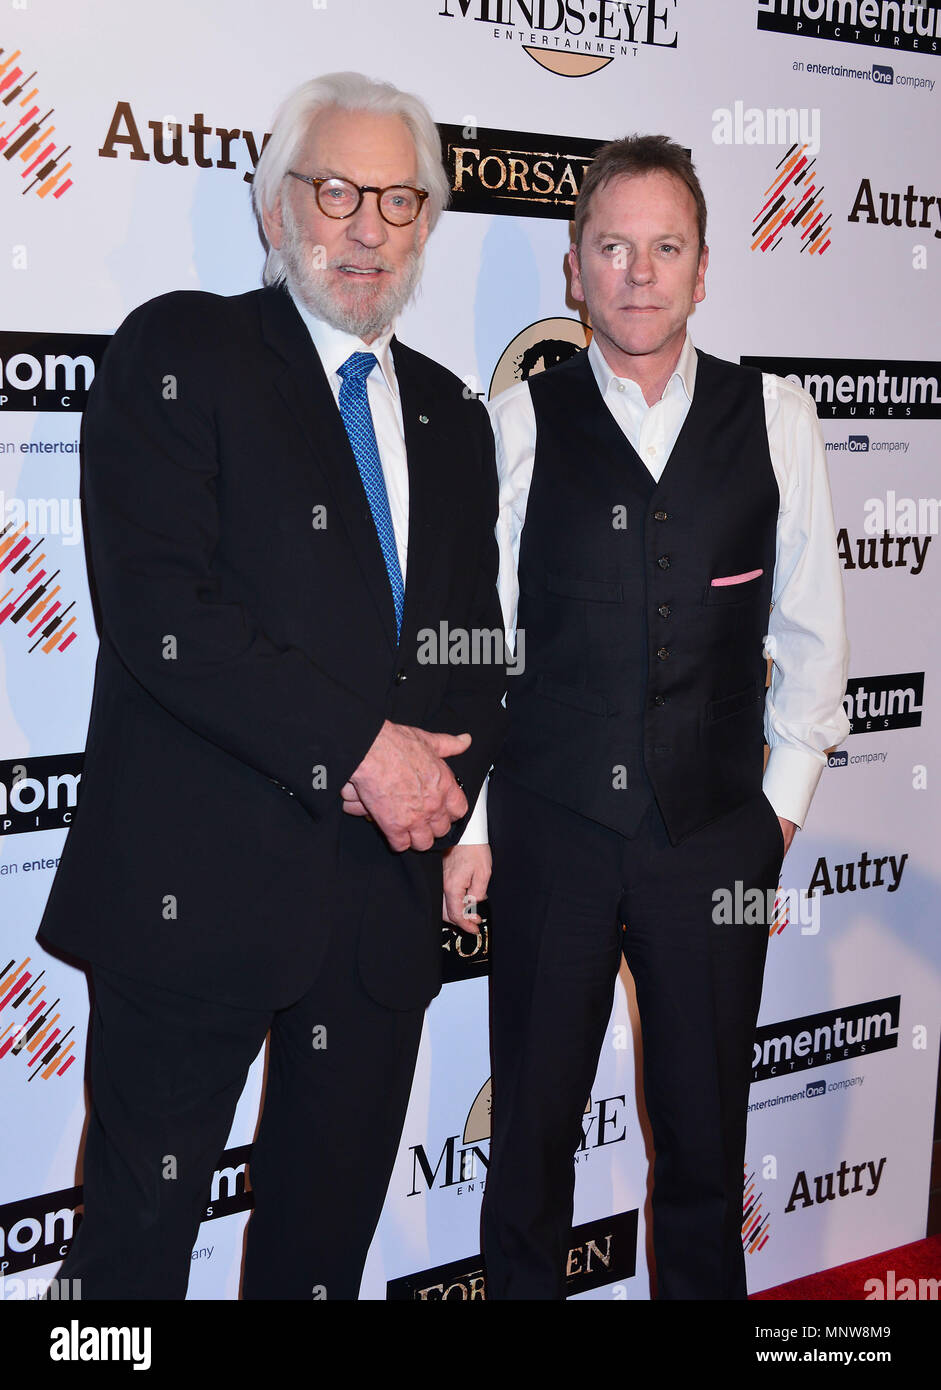 Donald Sutherland, Kiefer Sutherland 136 at Forsaken Premiere at the Autry Museum in Los Angeles. February 16, 2016.a Donald Sutherland, Kiefer Sutherland 136 ------------- Red Carpet Event, Vertical, USA, Film Industry, Celebrities,  Photography, Bestof, Arts Culture and Entertainment, Topix Celebrities fashion /  Vertical, Best of, Event in Hollywood Life - California,  Red Carpet and backstage, USA, Film Industry, Celebrities,  movie celebrities, TV celebrities, Music celebrities, Photography, Bestof, Arts Culture and Entertainment,  Topix, vertical,  family from from the year , 2016, inqui Stock Photo